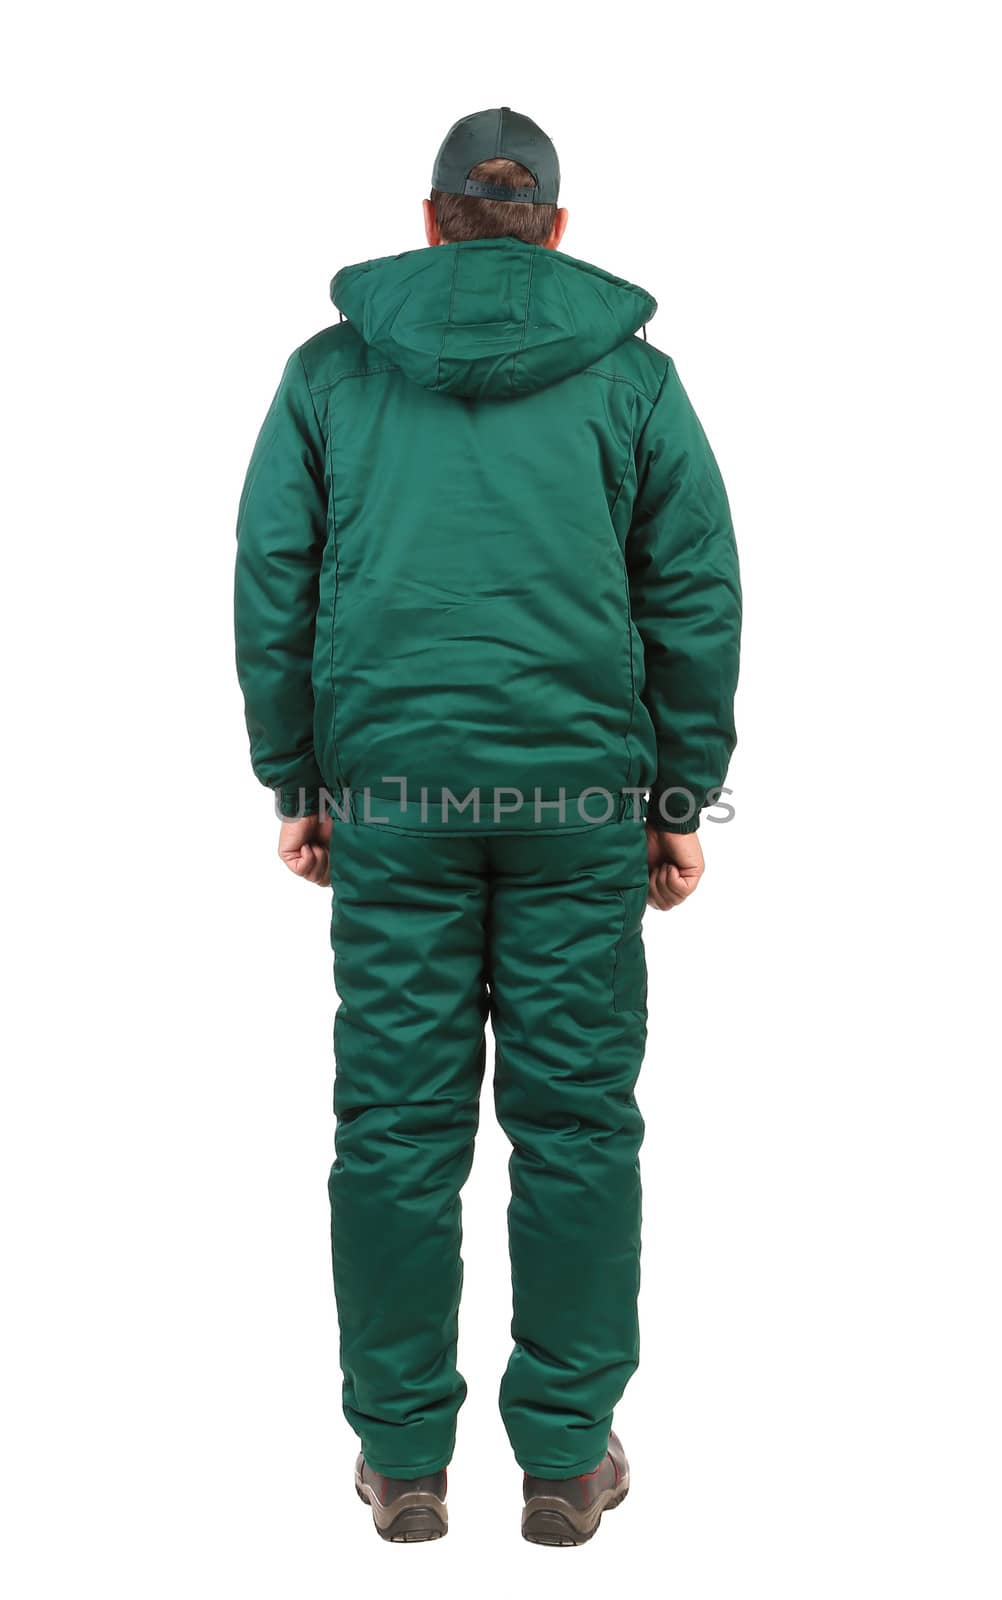 Worker in green overalls. Isolated on a white background.